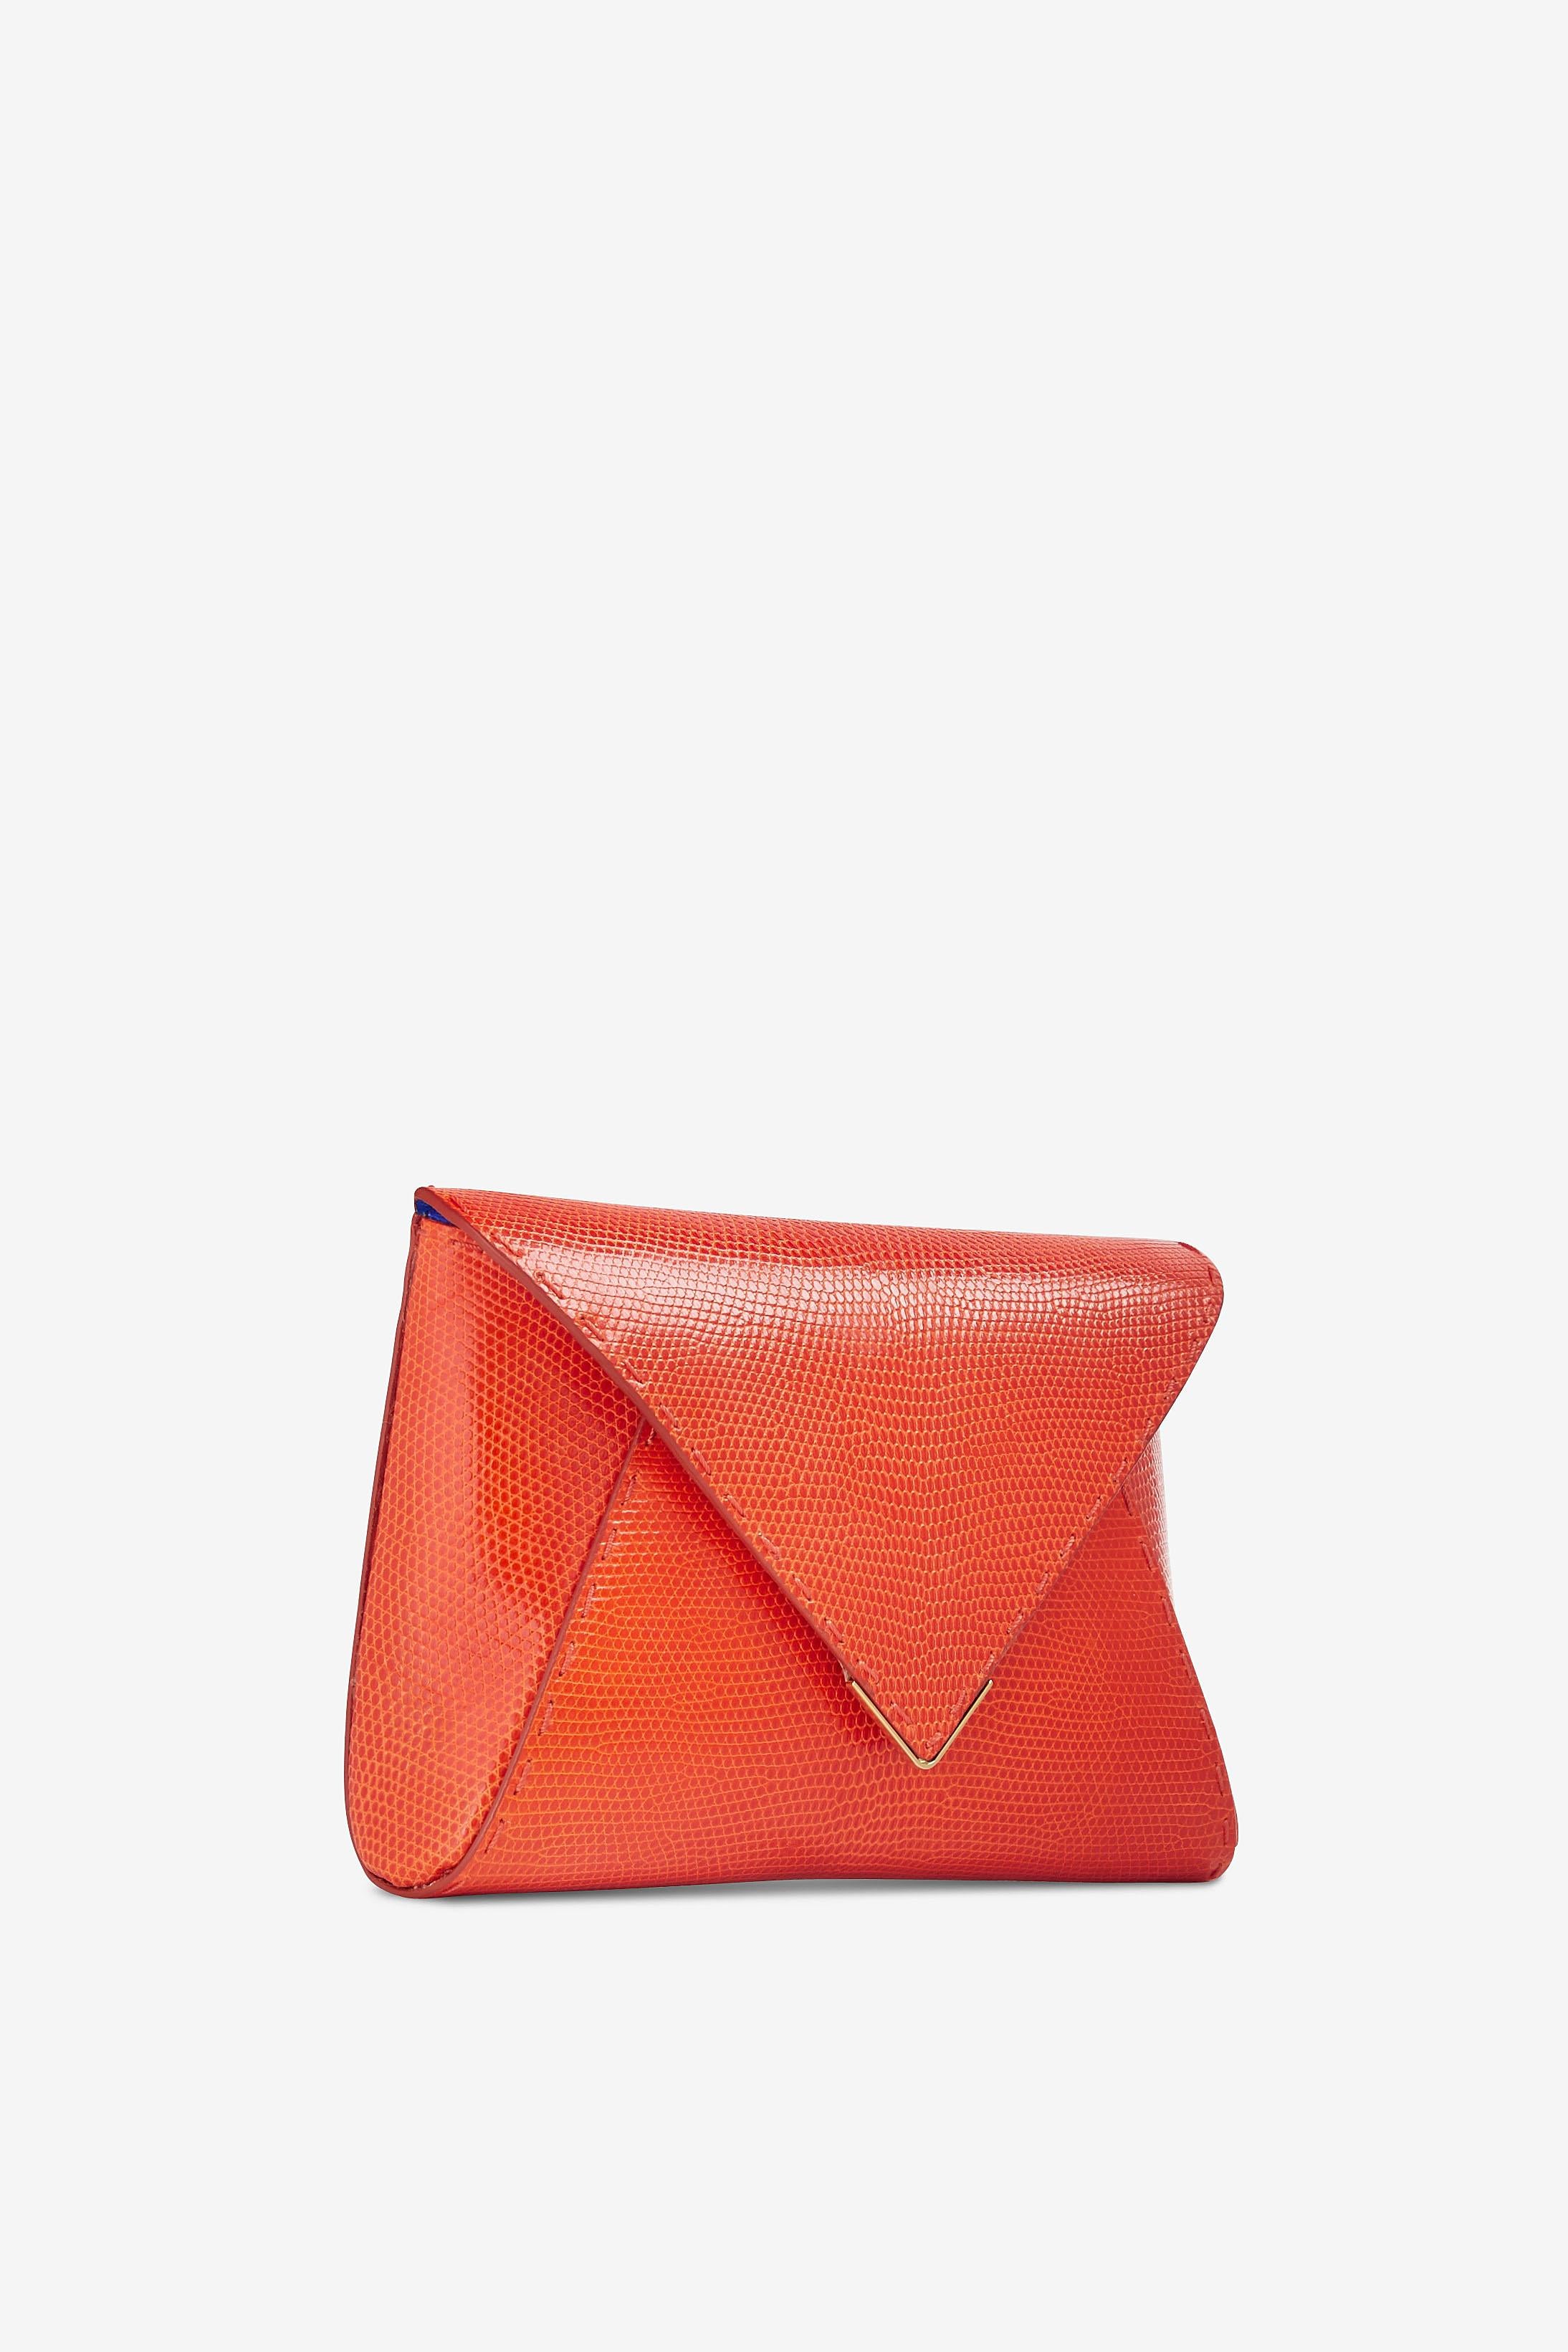 The Lee Pouchet Small Bright Orange Lizard Gold Hardware is a soft clutch designed with a triangular front flap and a magnetic closure. The exterior detailing is entirely hand-stitched. It features a hidden exterior pocket, a detachable gold